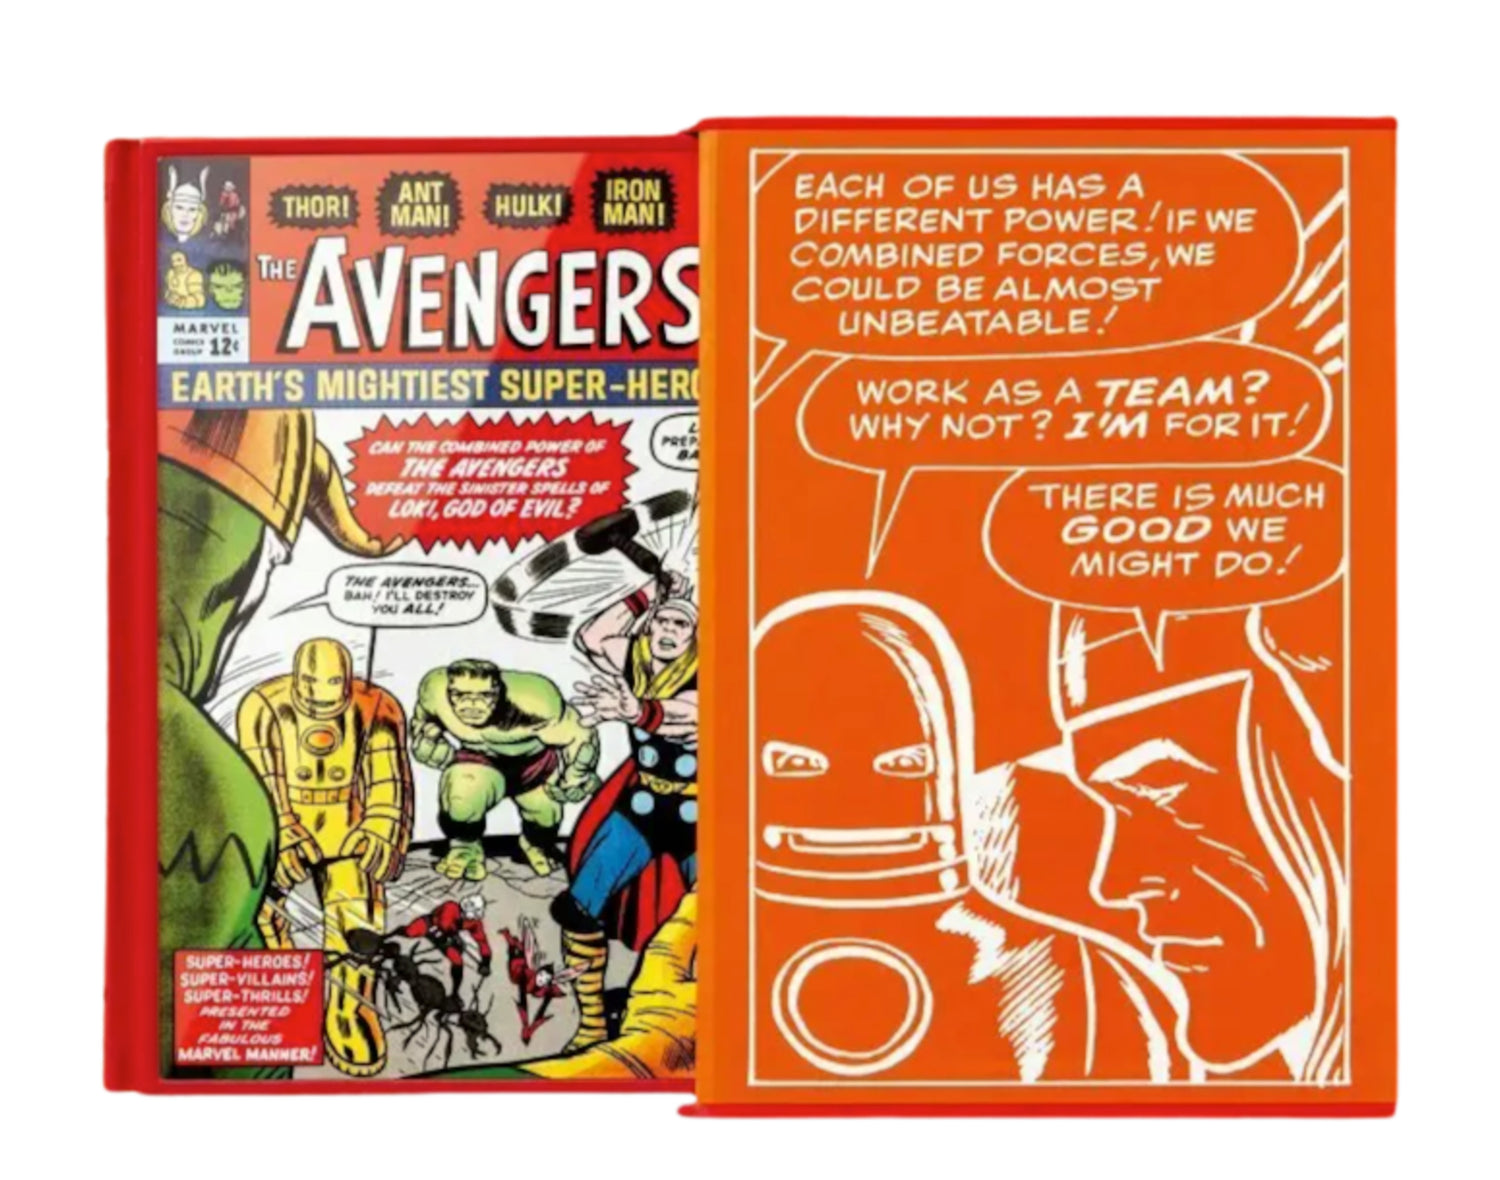 Taschen Books - Marvel Comics Library. Avengers. Vol. 1. 1963–1965 - Collector’s Edition of 1,000 numbered copies